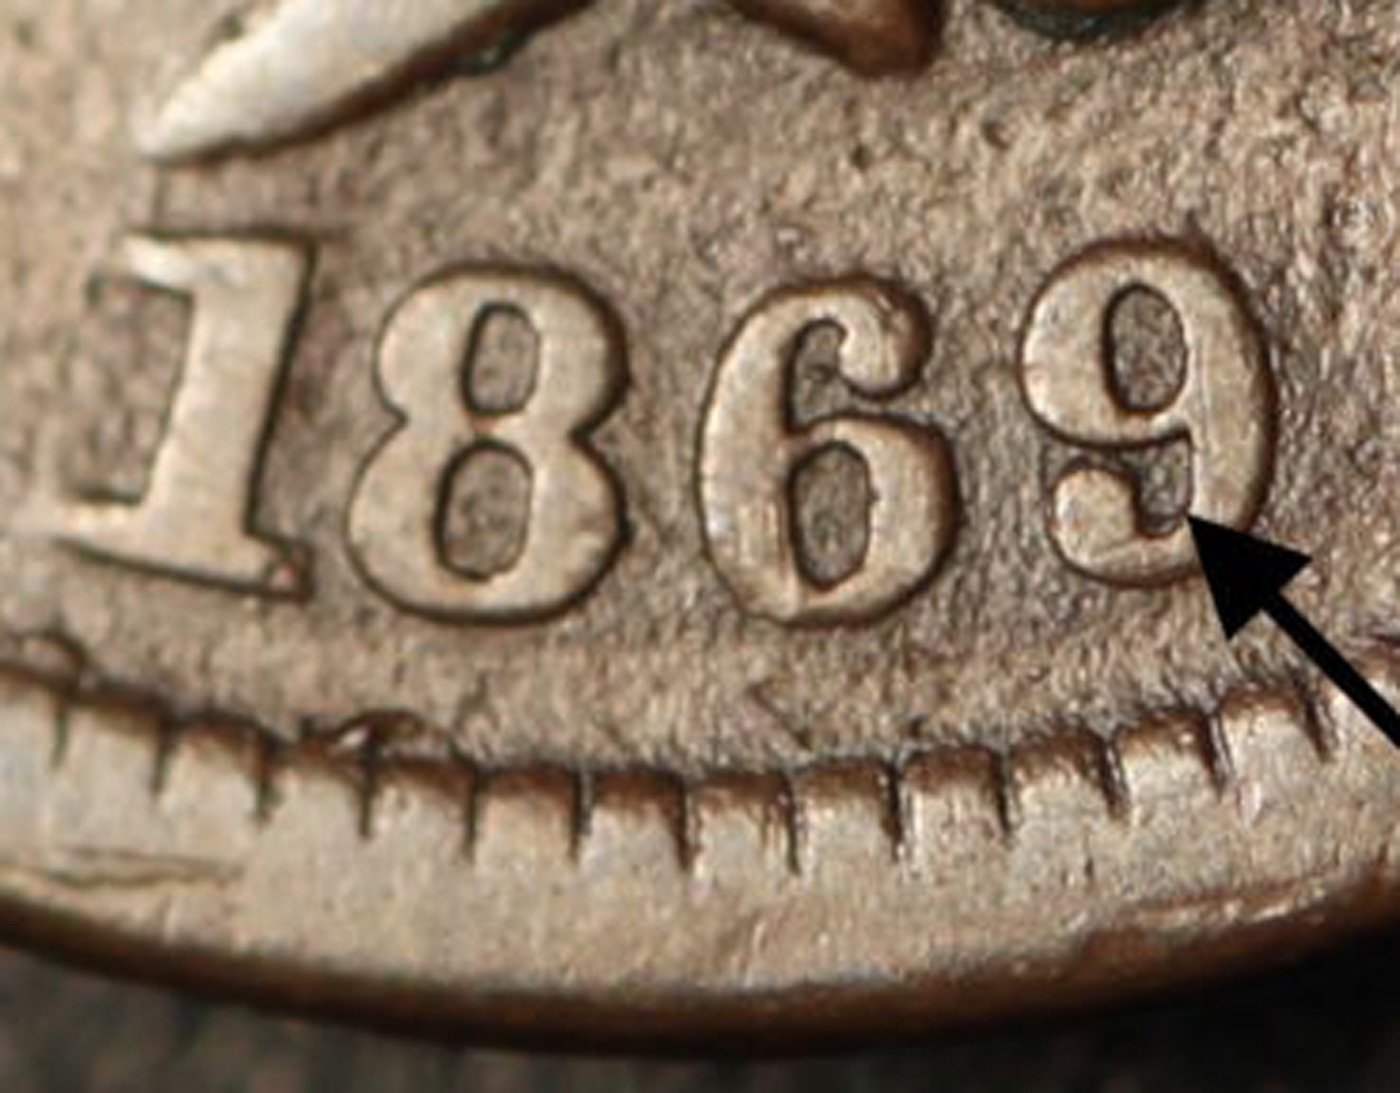 1869 RPD-014 - Indian Head Penny - Photo by Ed Nathanson